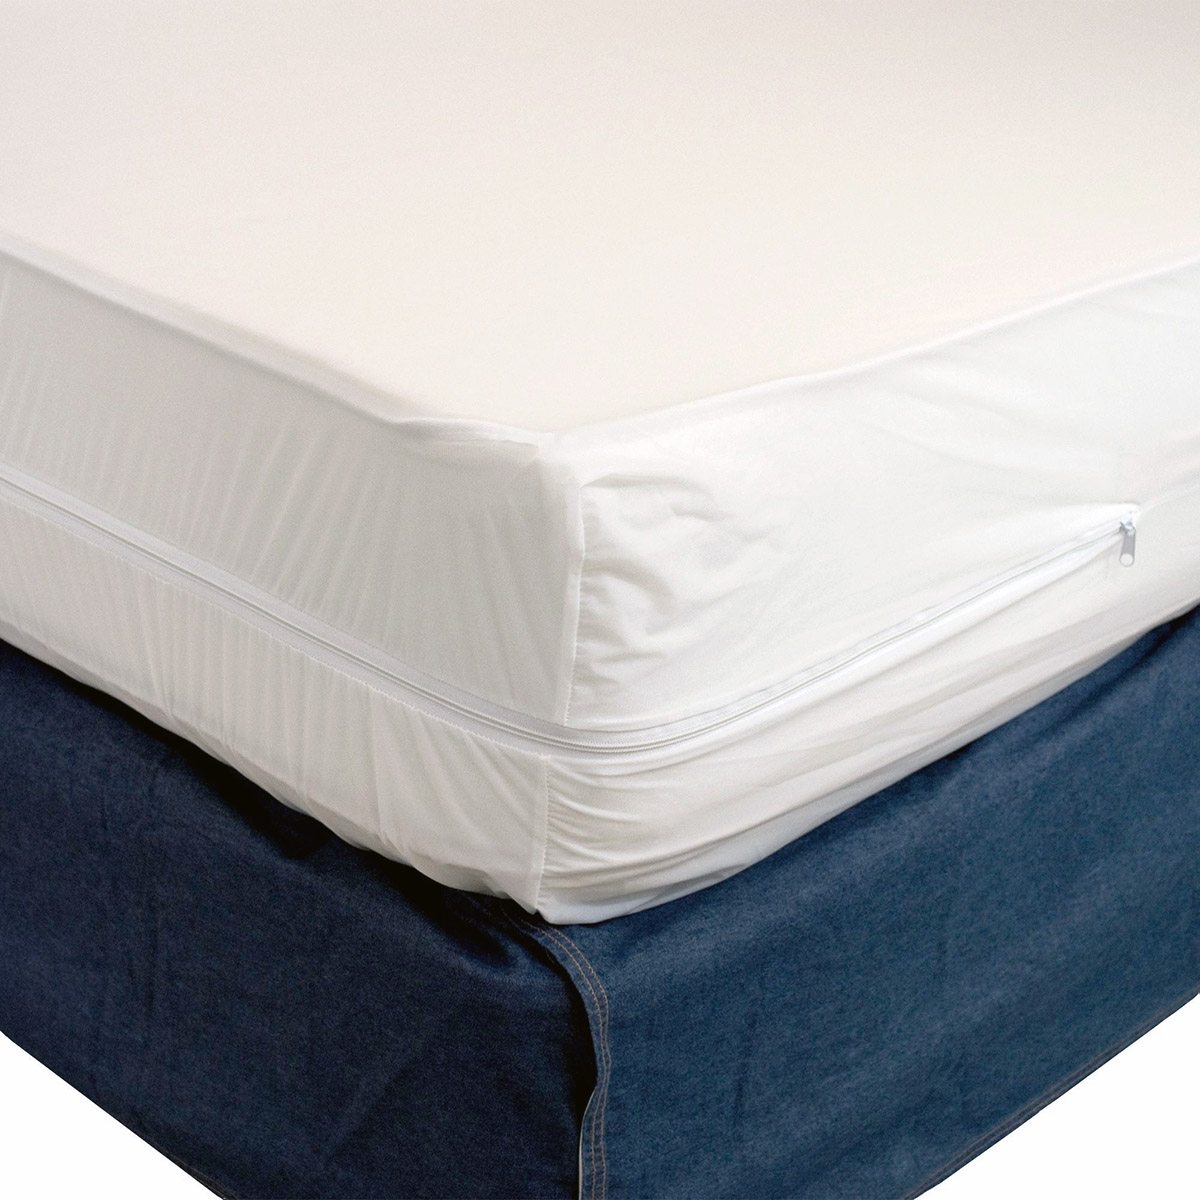 Relevance of mattress covers